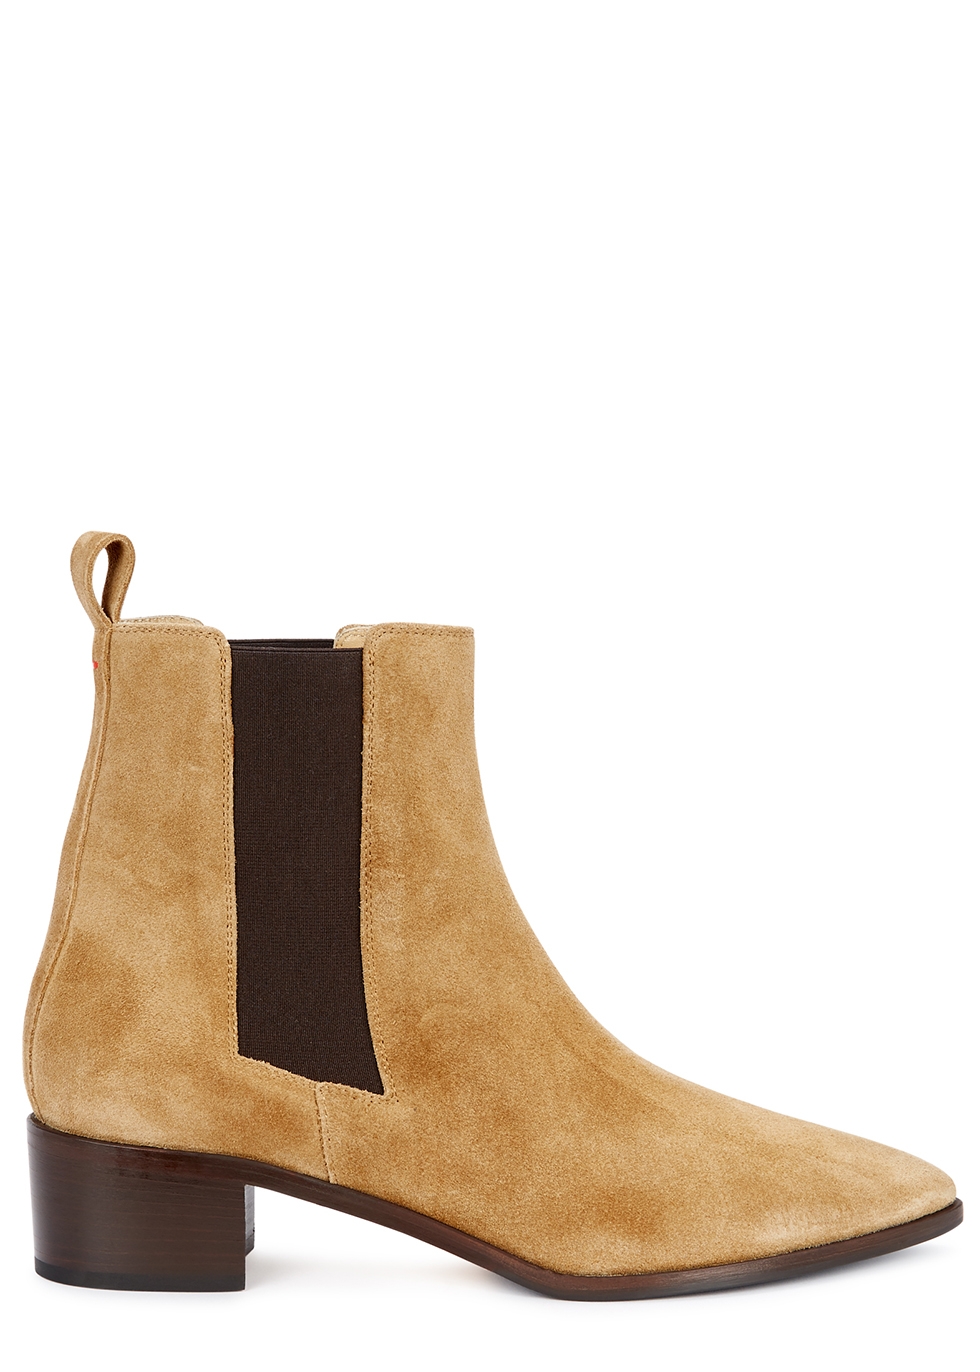 sand suede chelsea boots